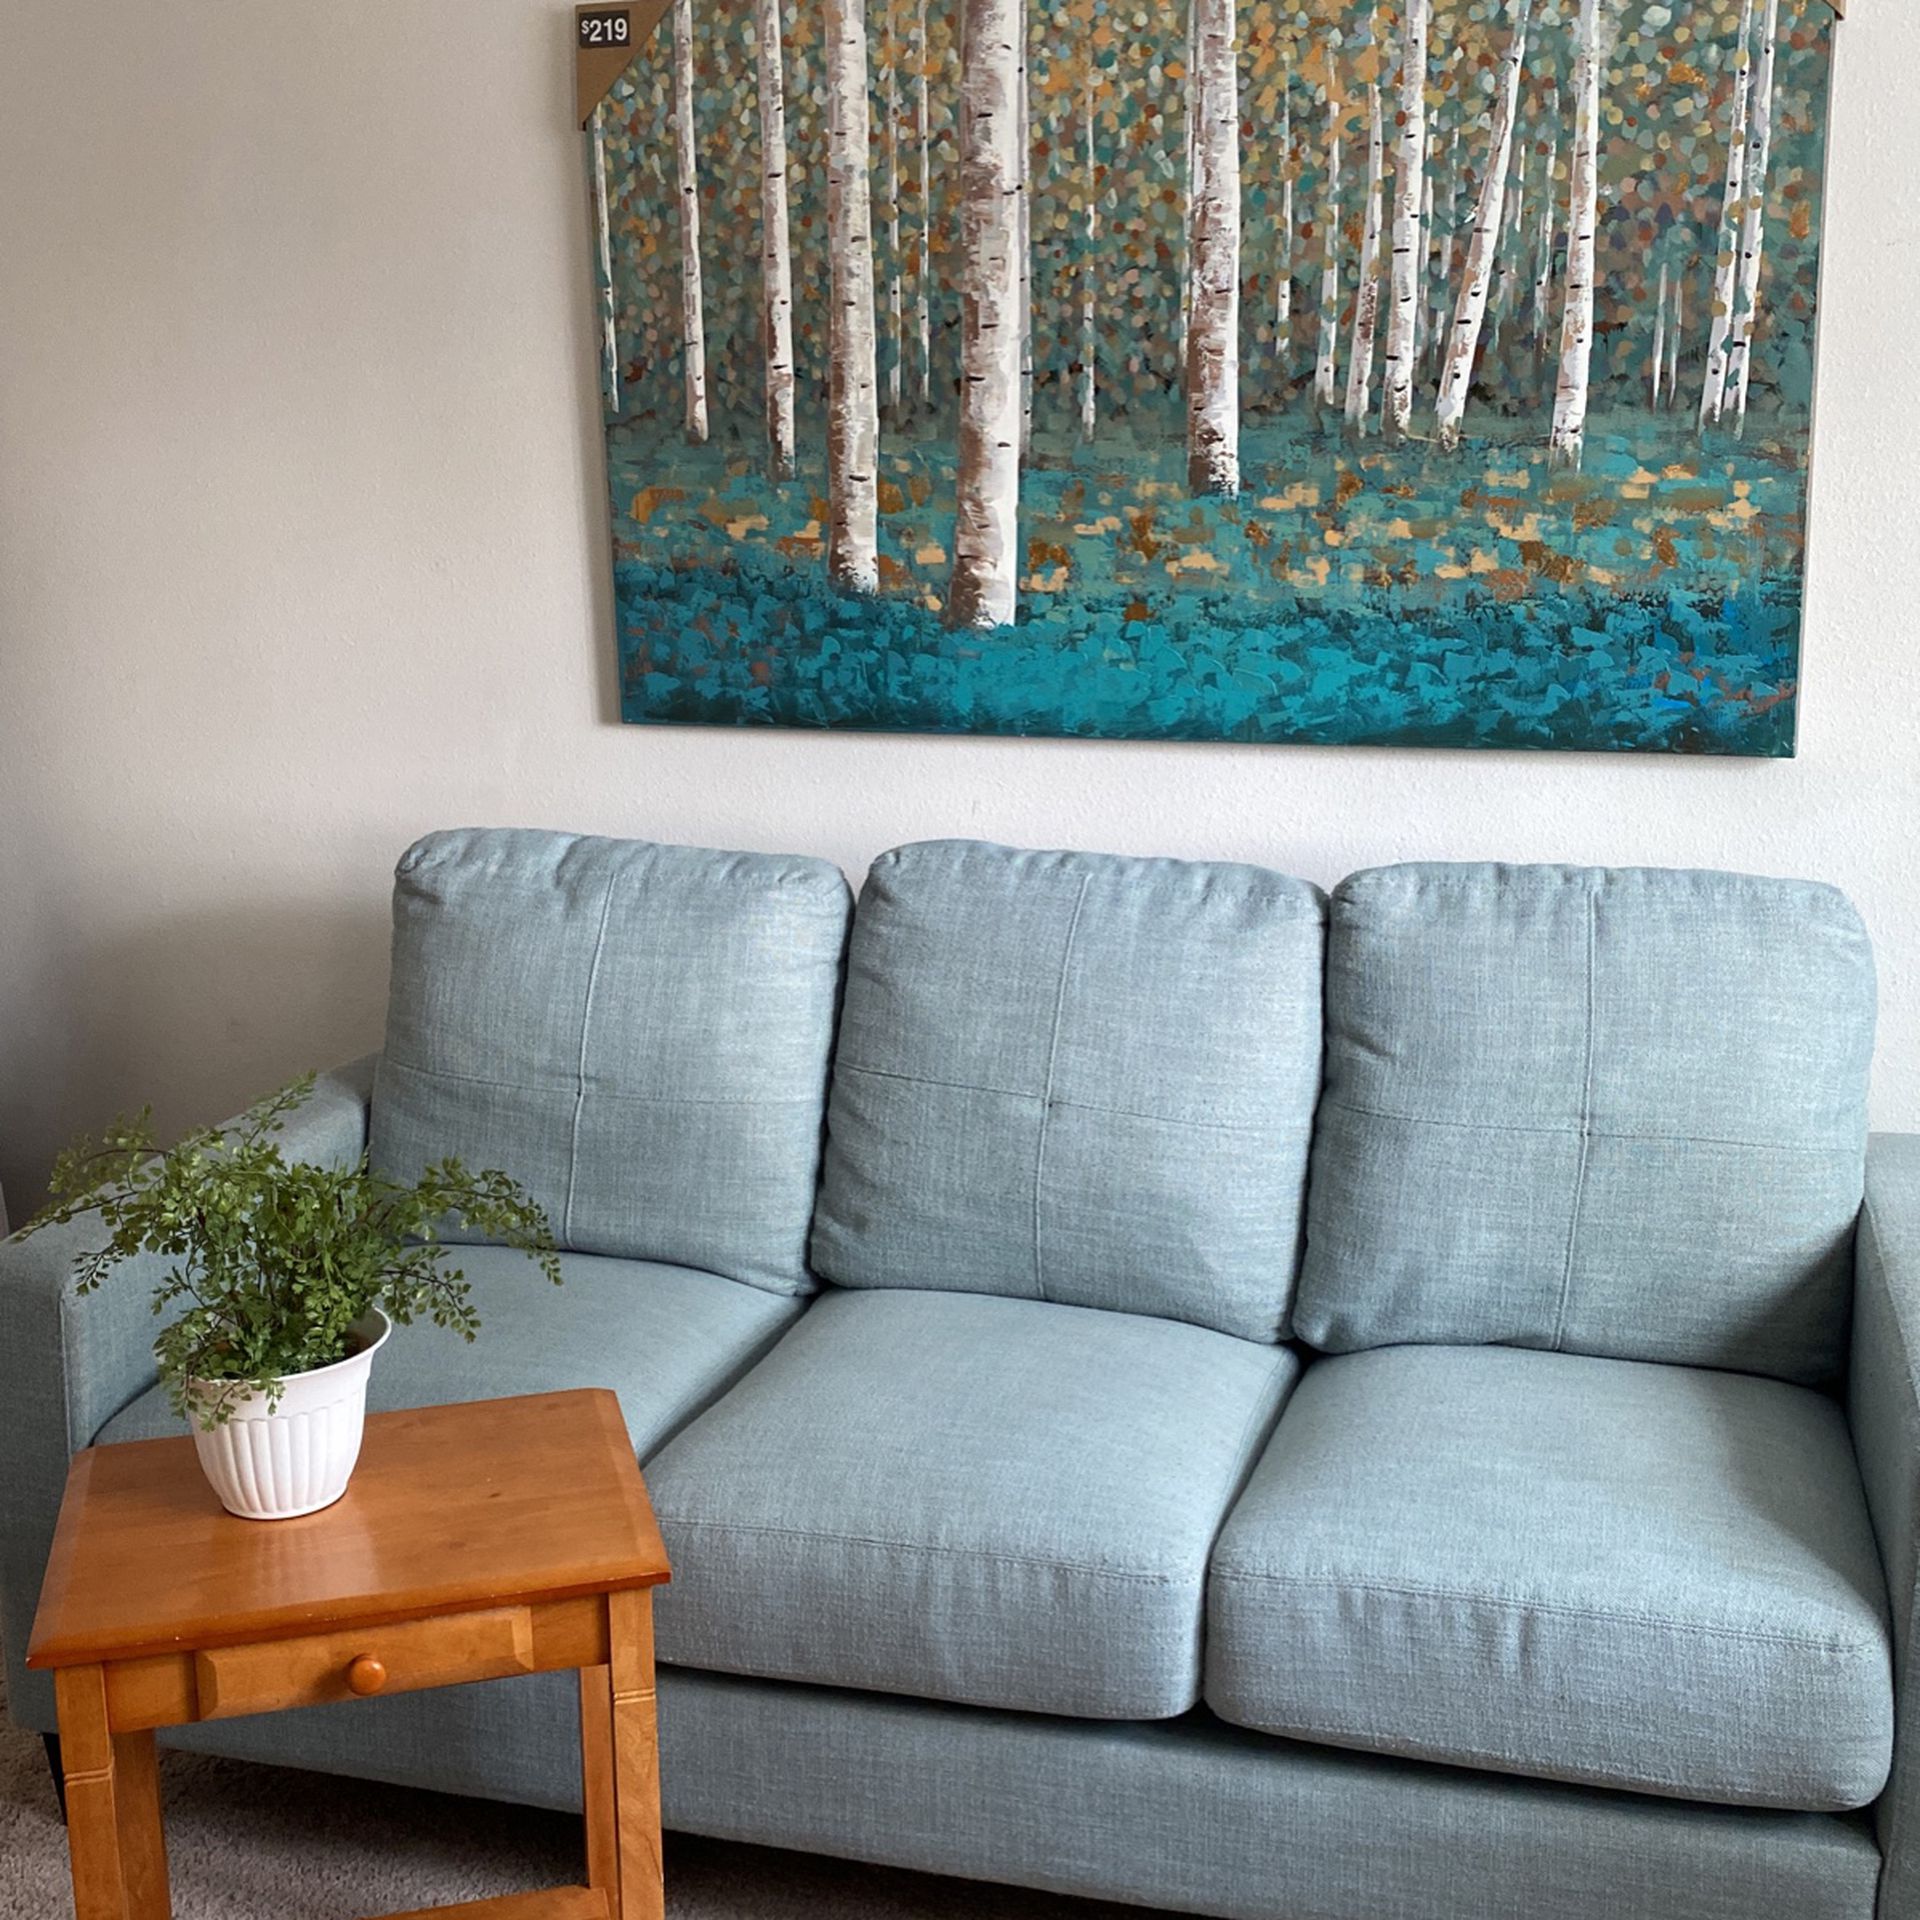 Sofa, Wall Art And Side Table With Drawer